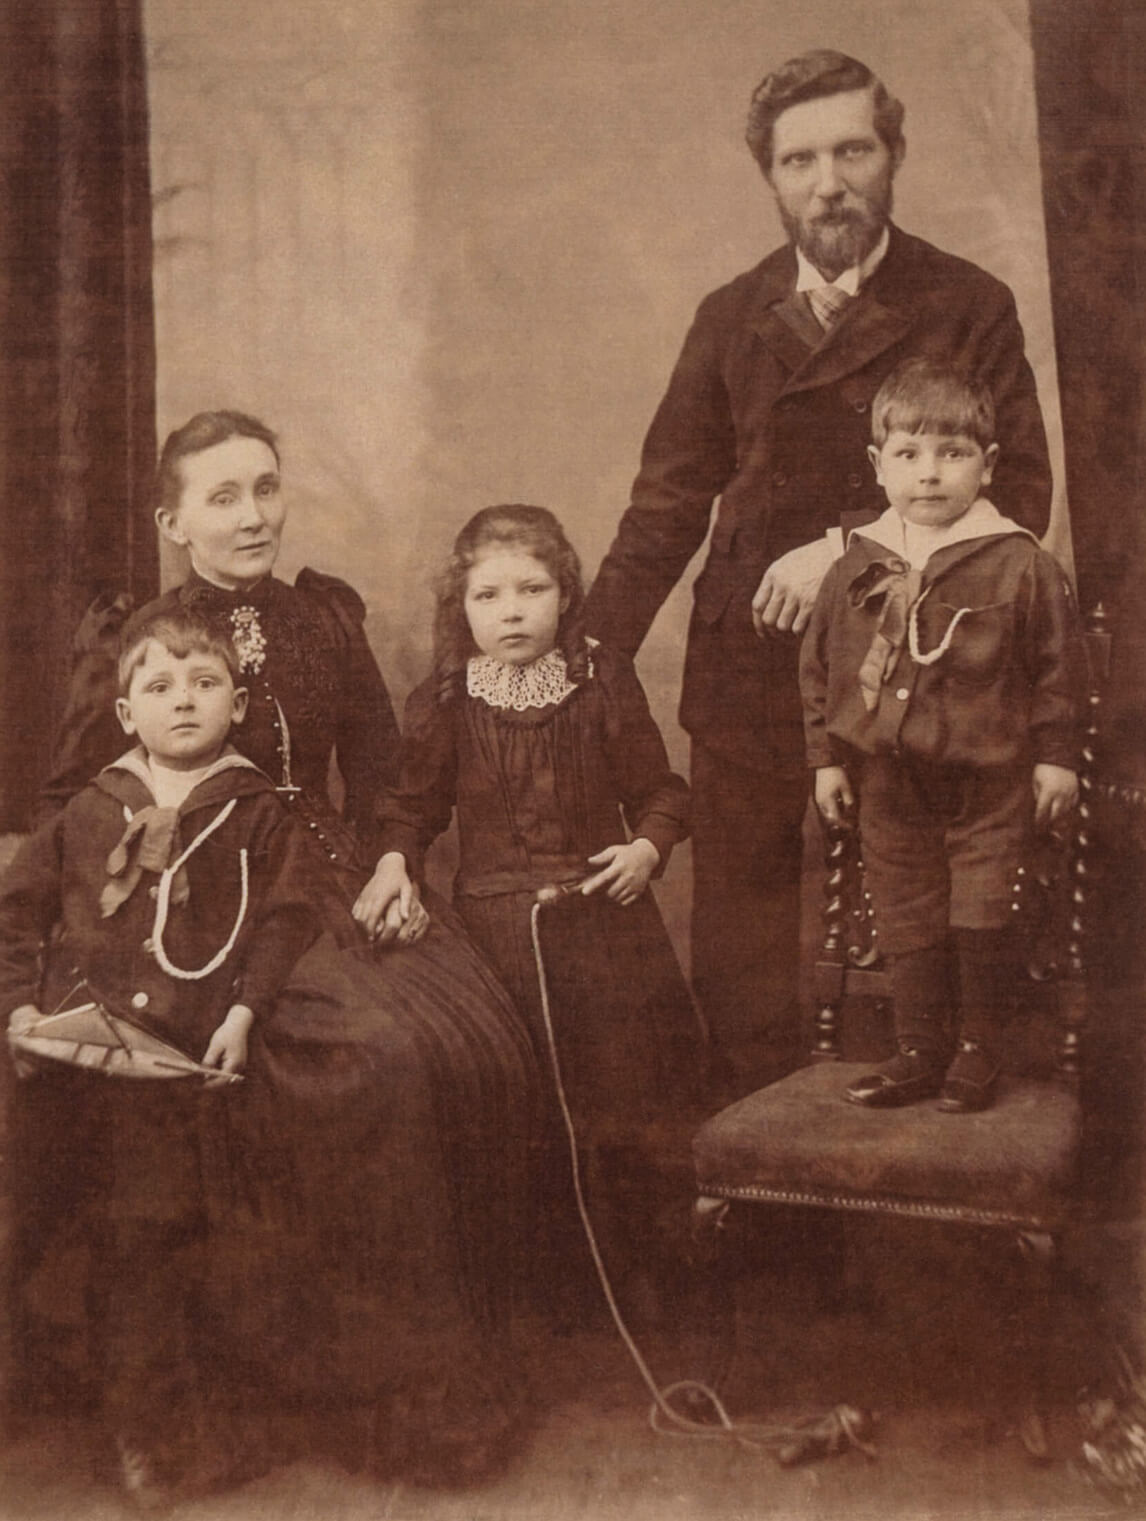 Photograph of Bertram Brooker with his parents and younger siblings in England, 1890s.